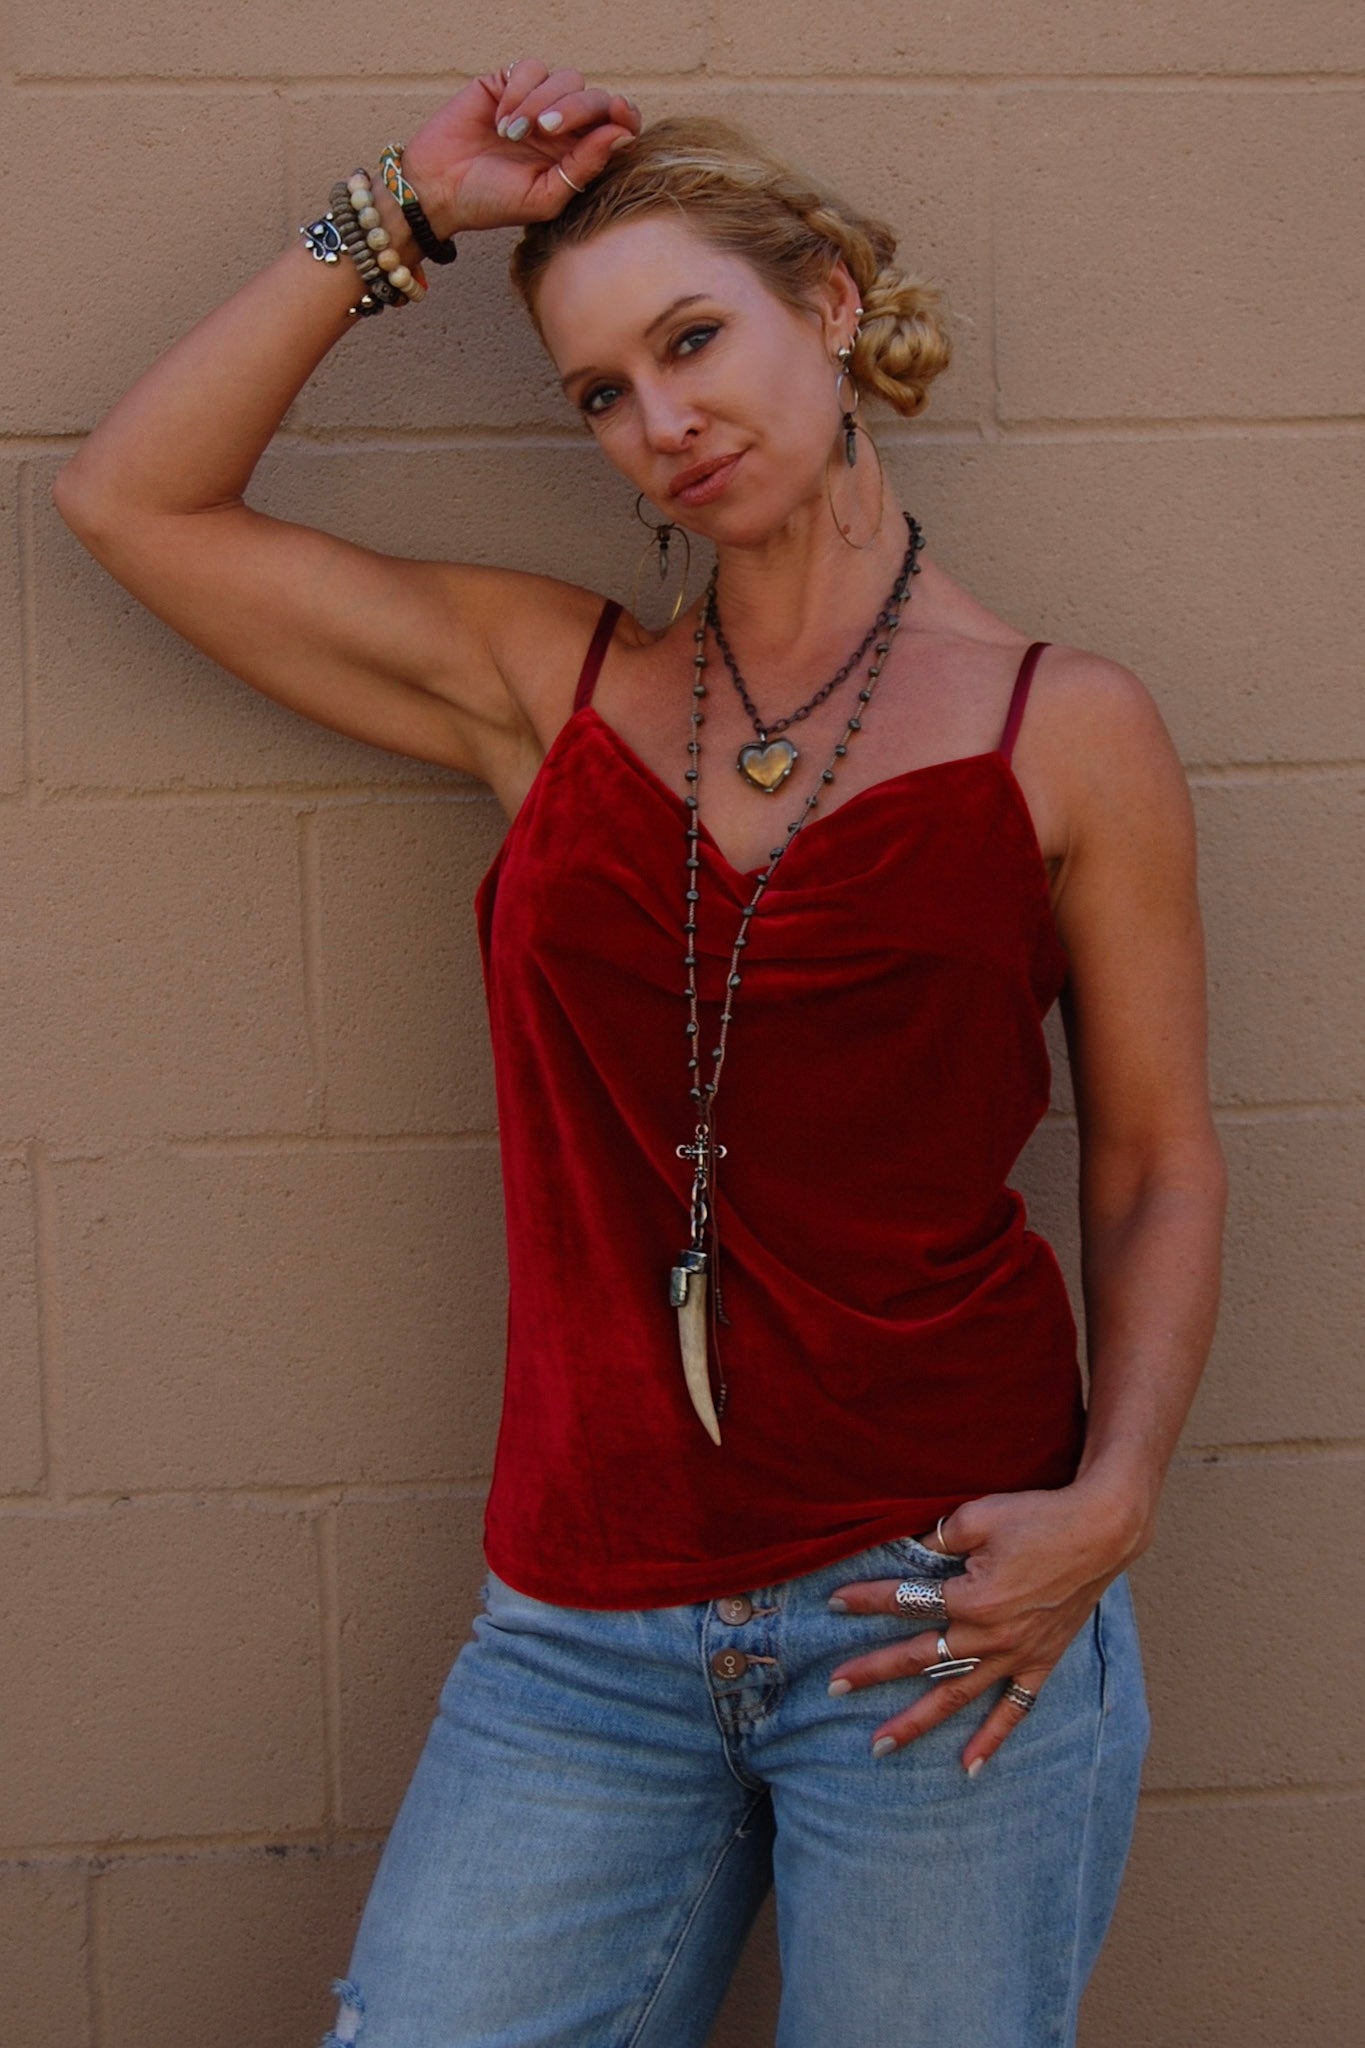 Load image into Gallery viewer, The Valerie Velvet Camisole in Red - SpiritedBoutiques Boho Hippie Boutique Style Camisole, BIZ
